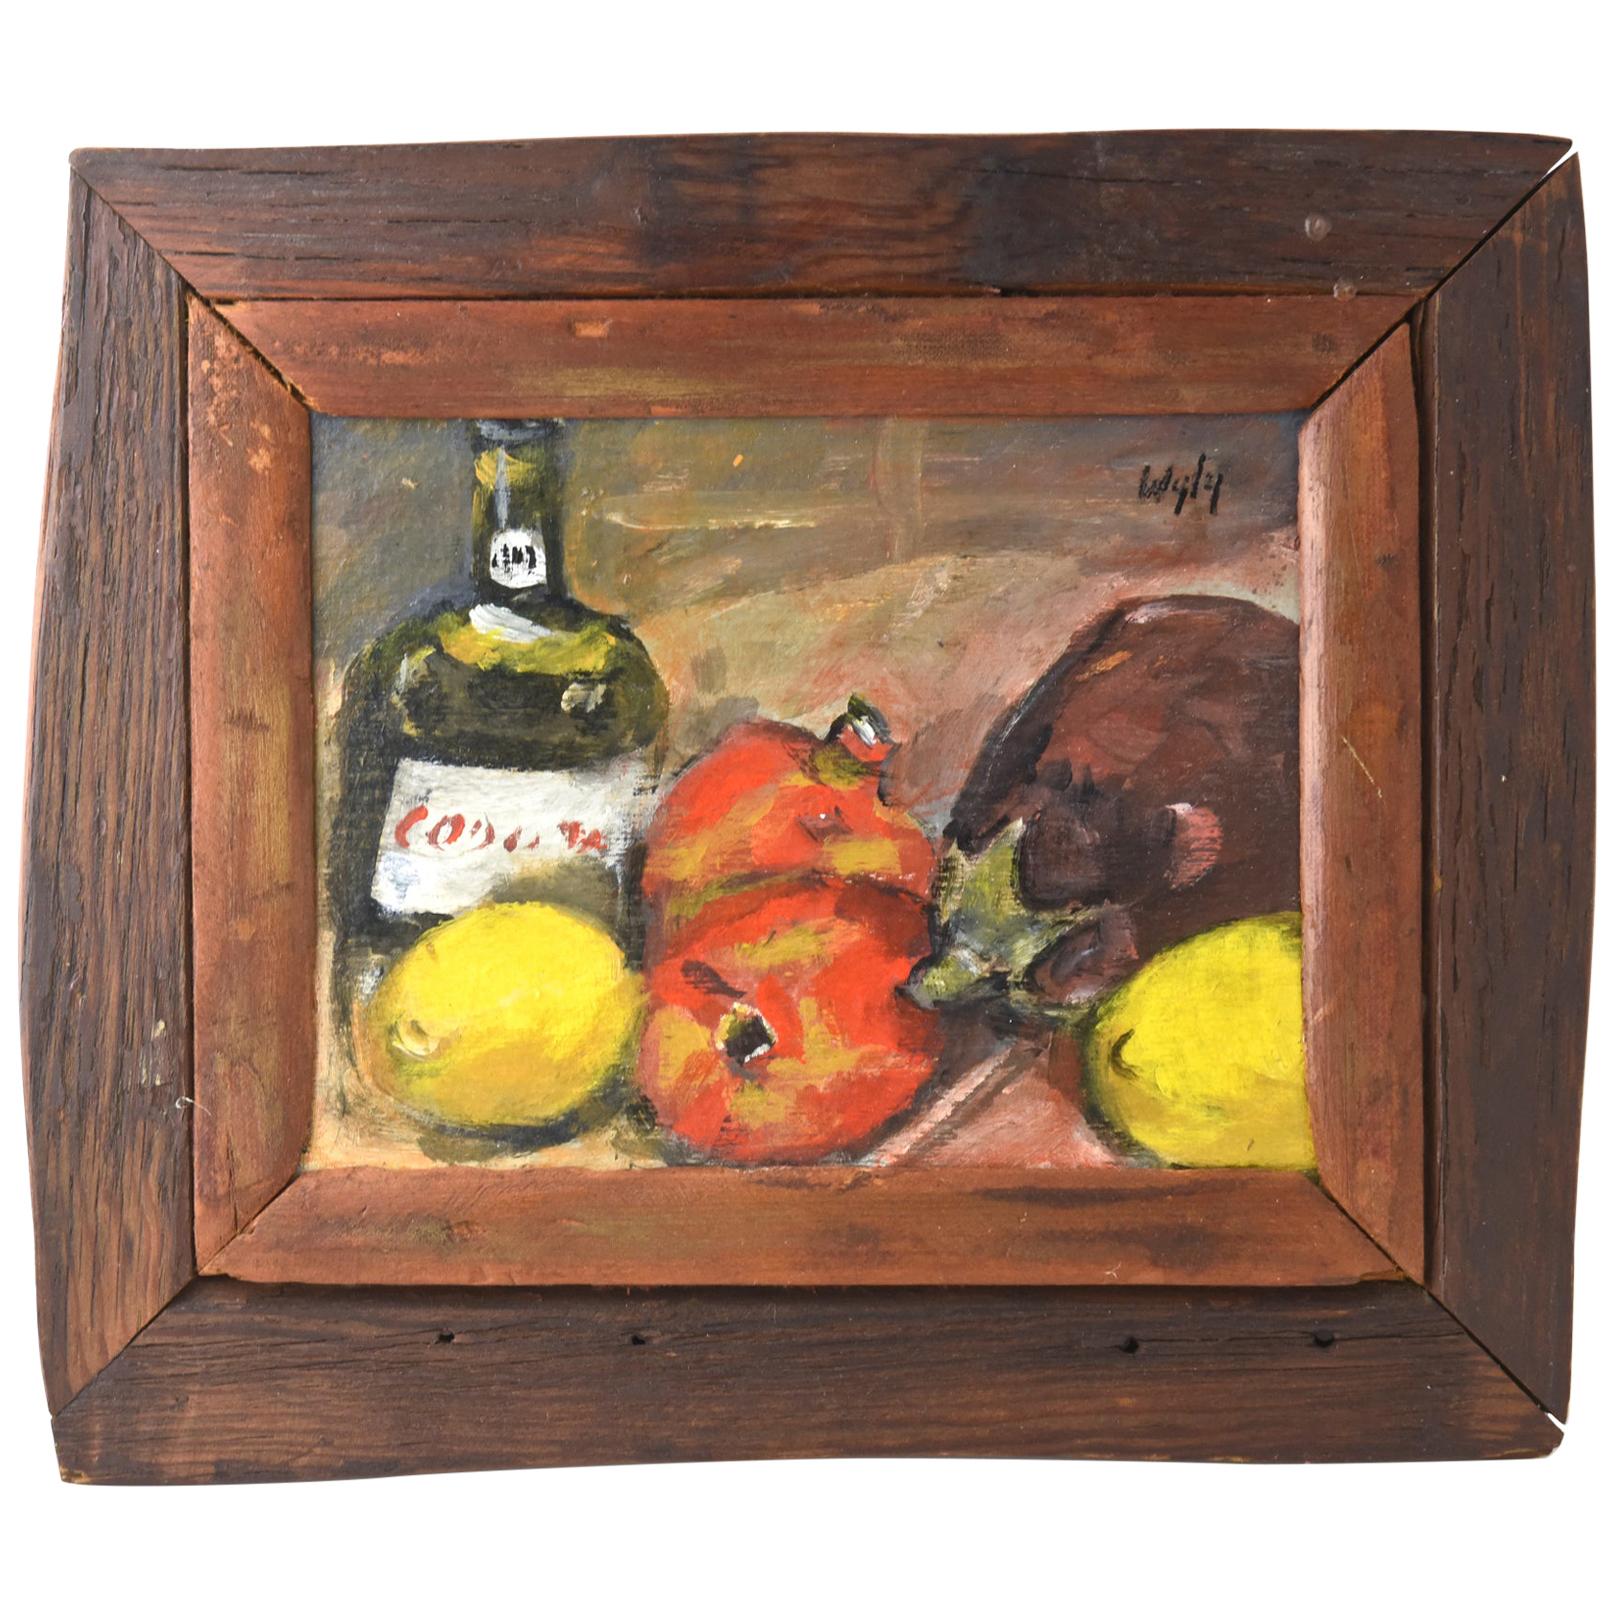 Fruit and Bottle Still Life by Wyly